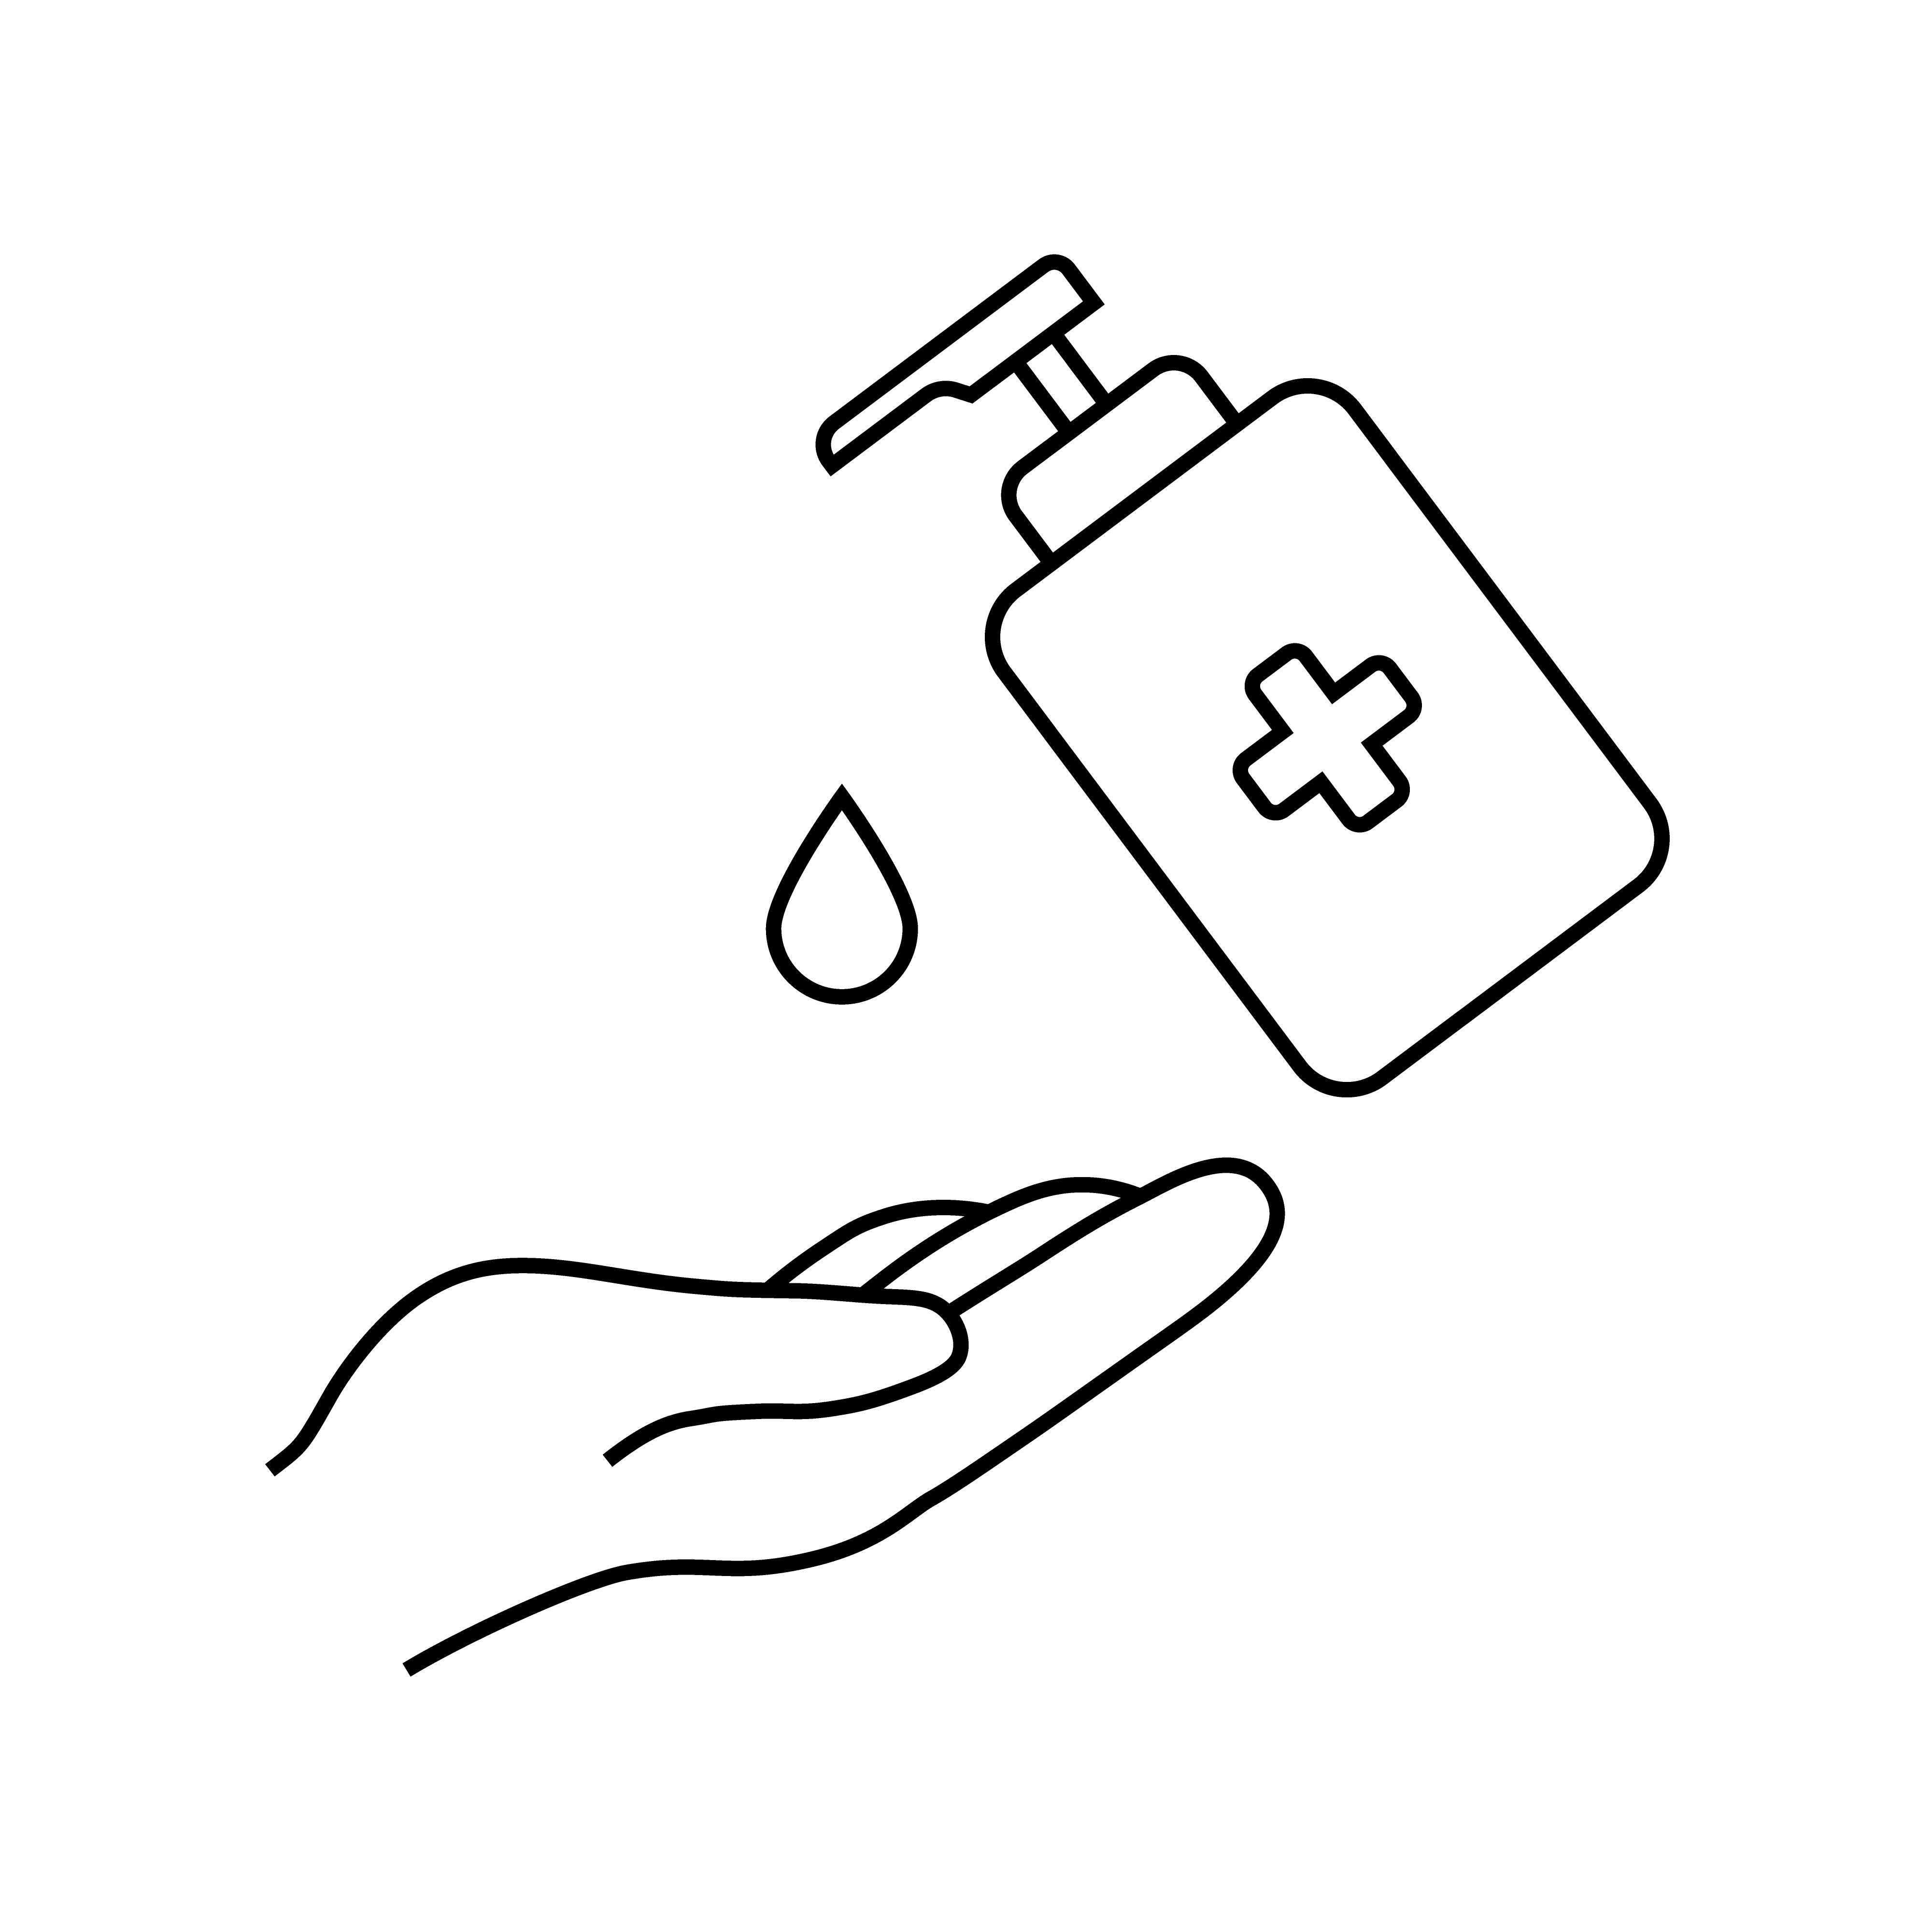 Washing hand with sanitizer soap. Washing hand with sanitizer Corona virus vector icon. Template for your design